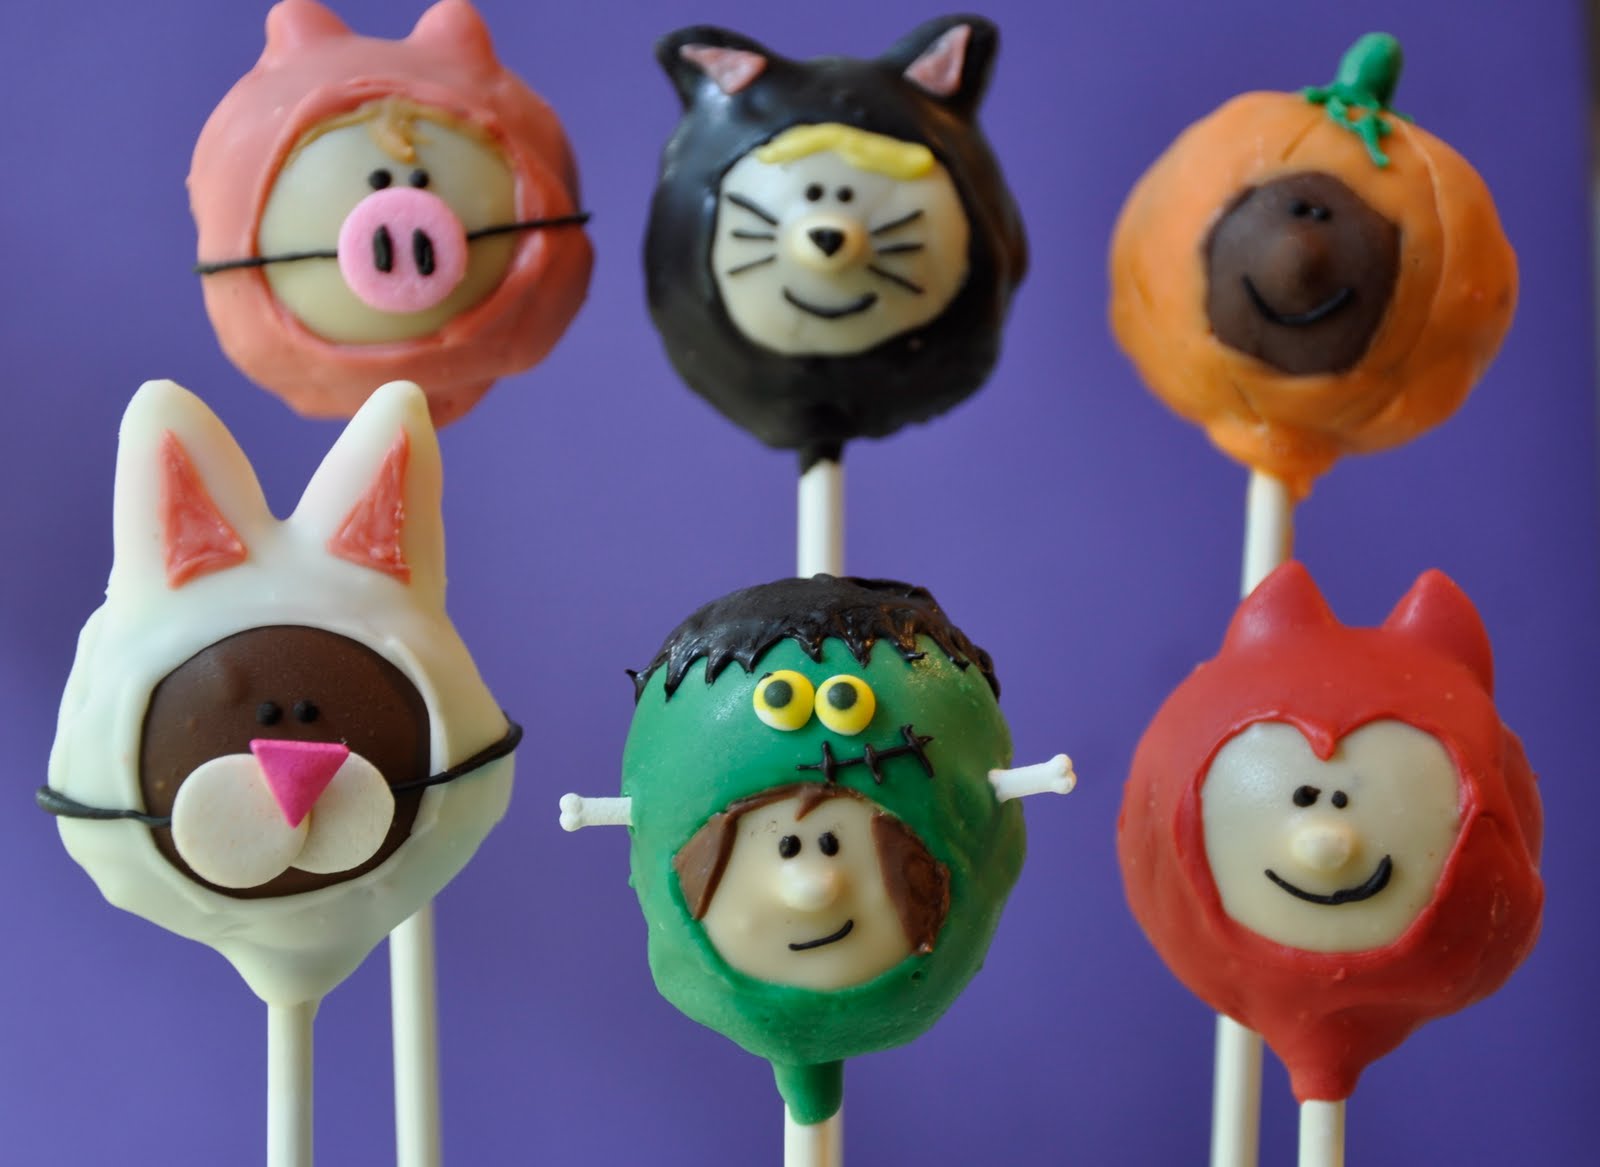 how to make halloween cake pops  pops kids in their halloween costumes into cake pops hope you enjoy